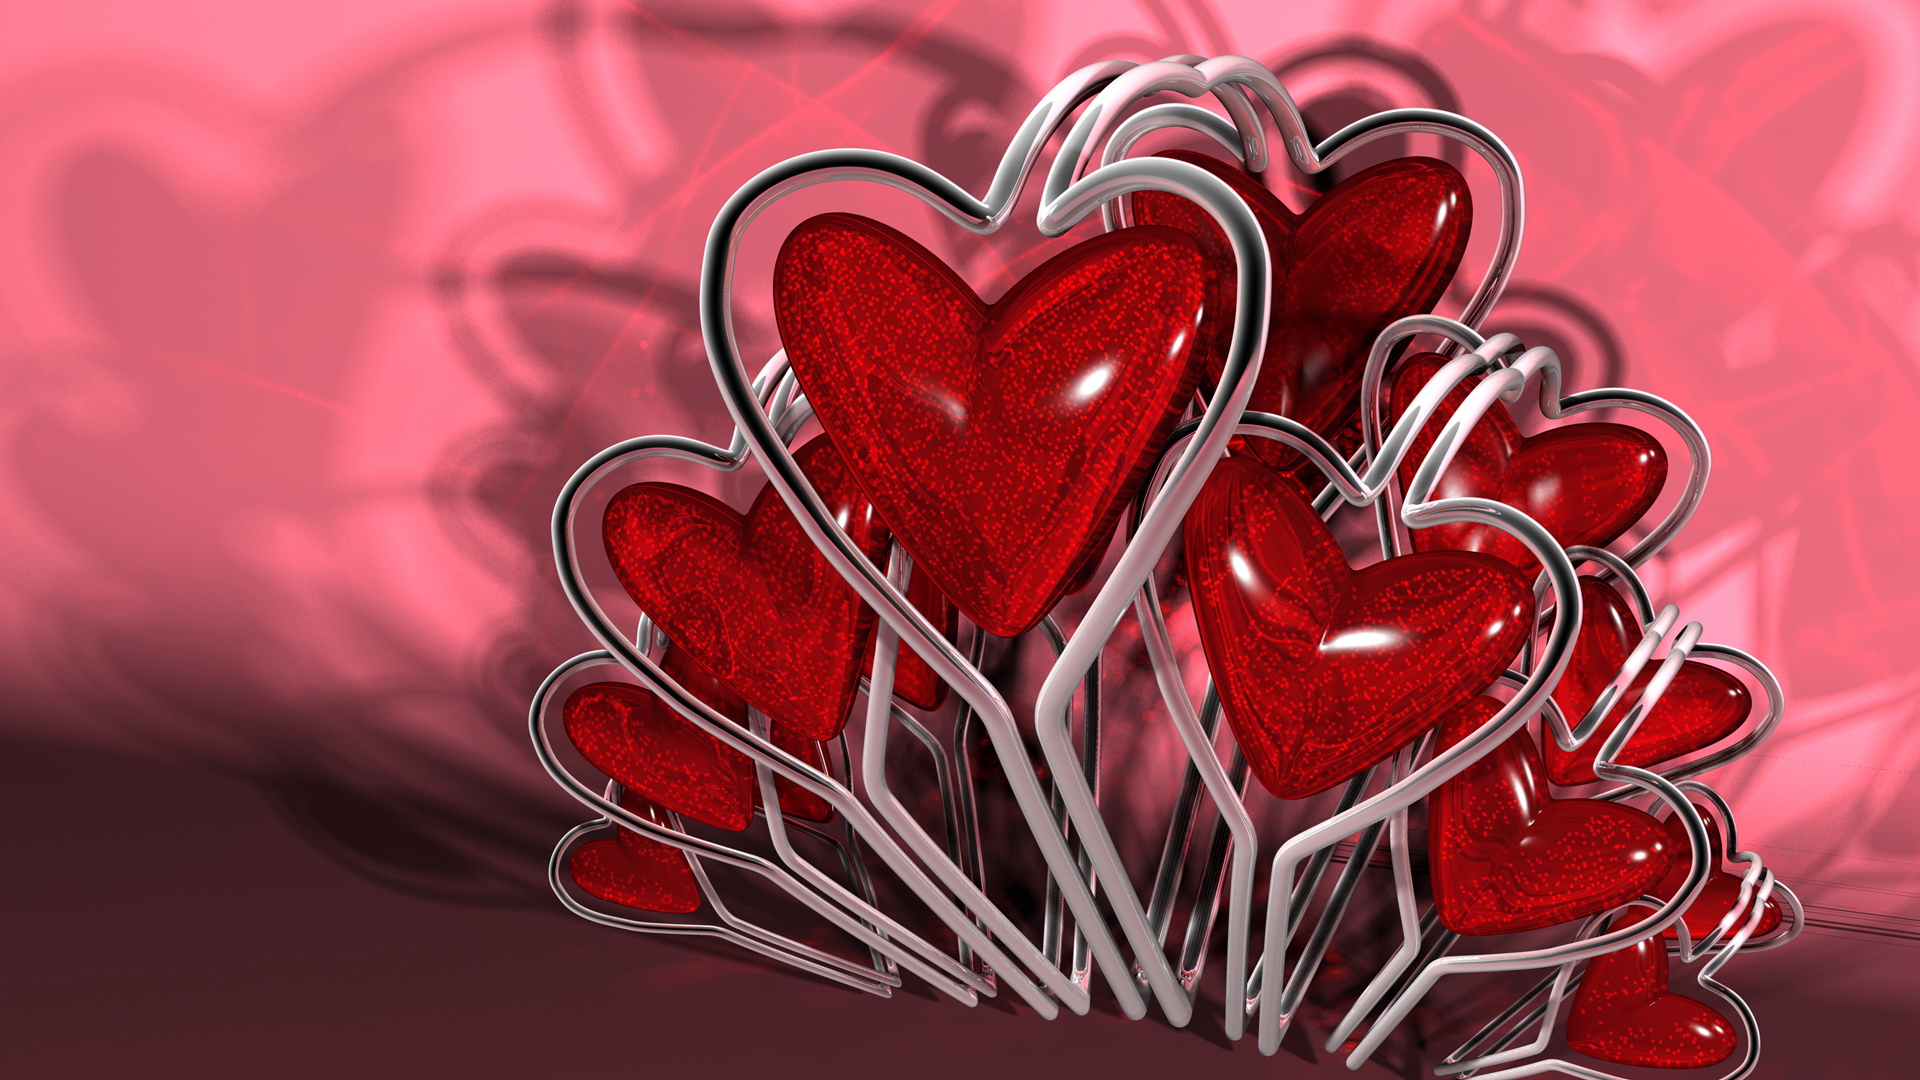 Background red heart